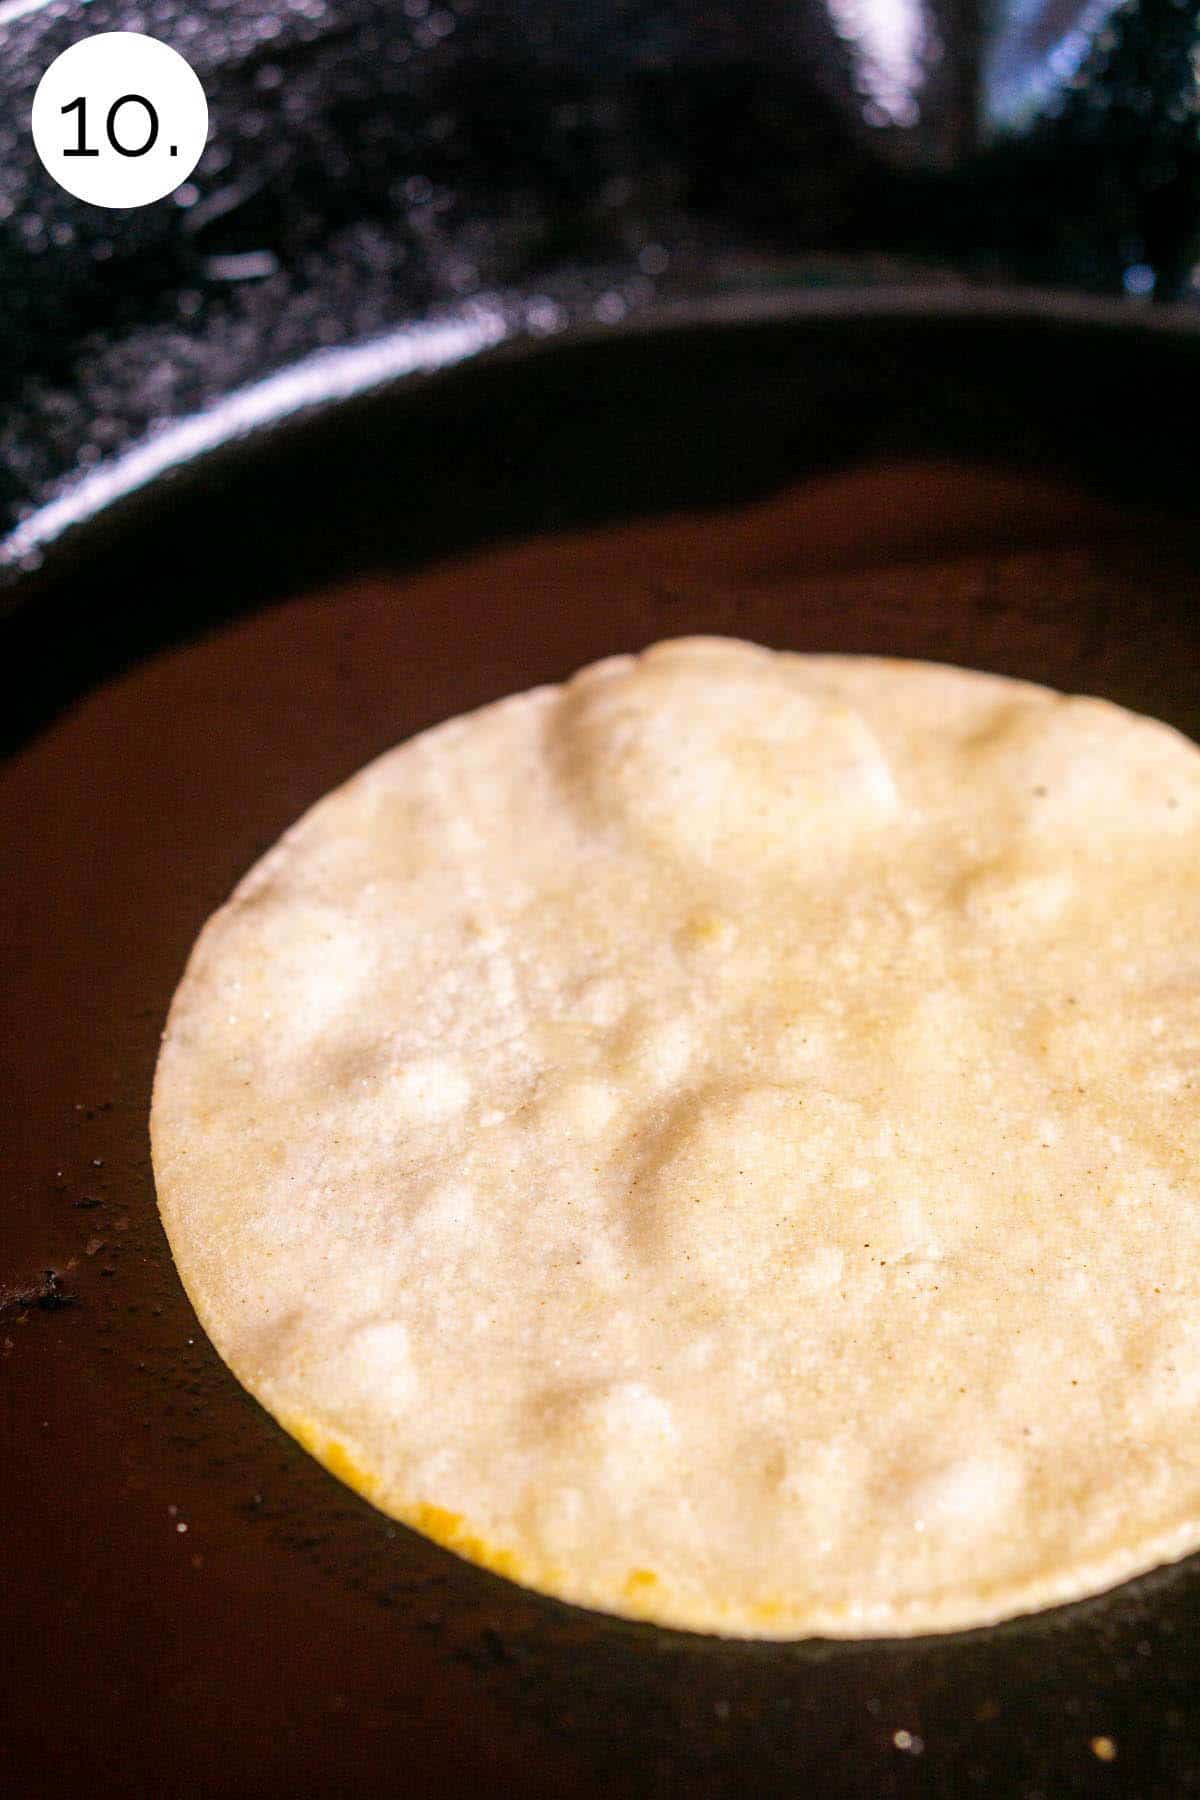 A corn tortillas frying in oil in a cast-iron skillet to make pliable and toast the flavor.